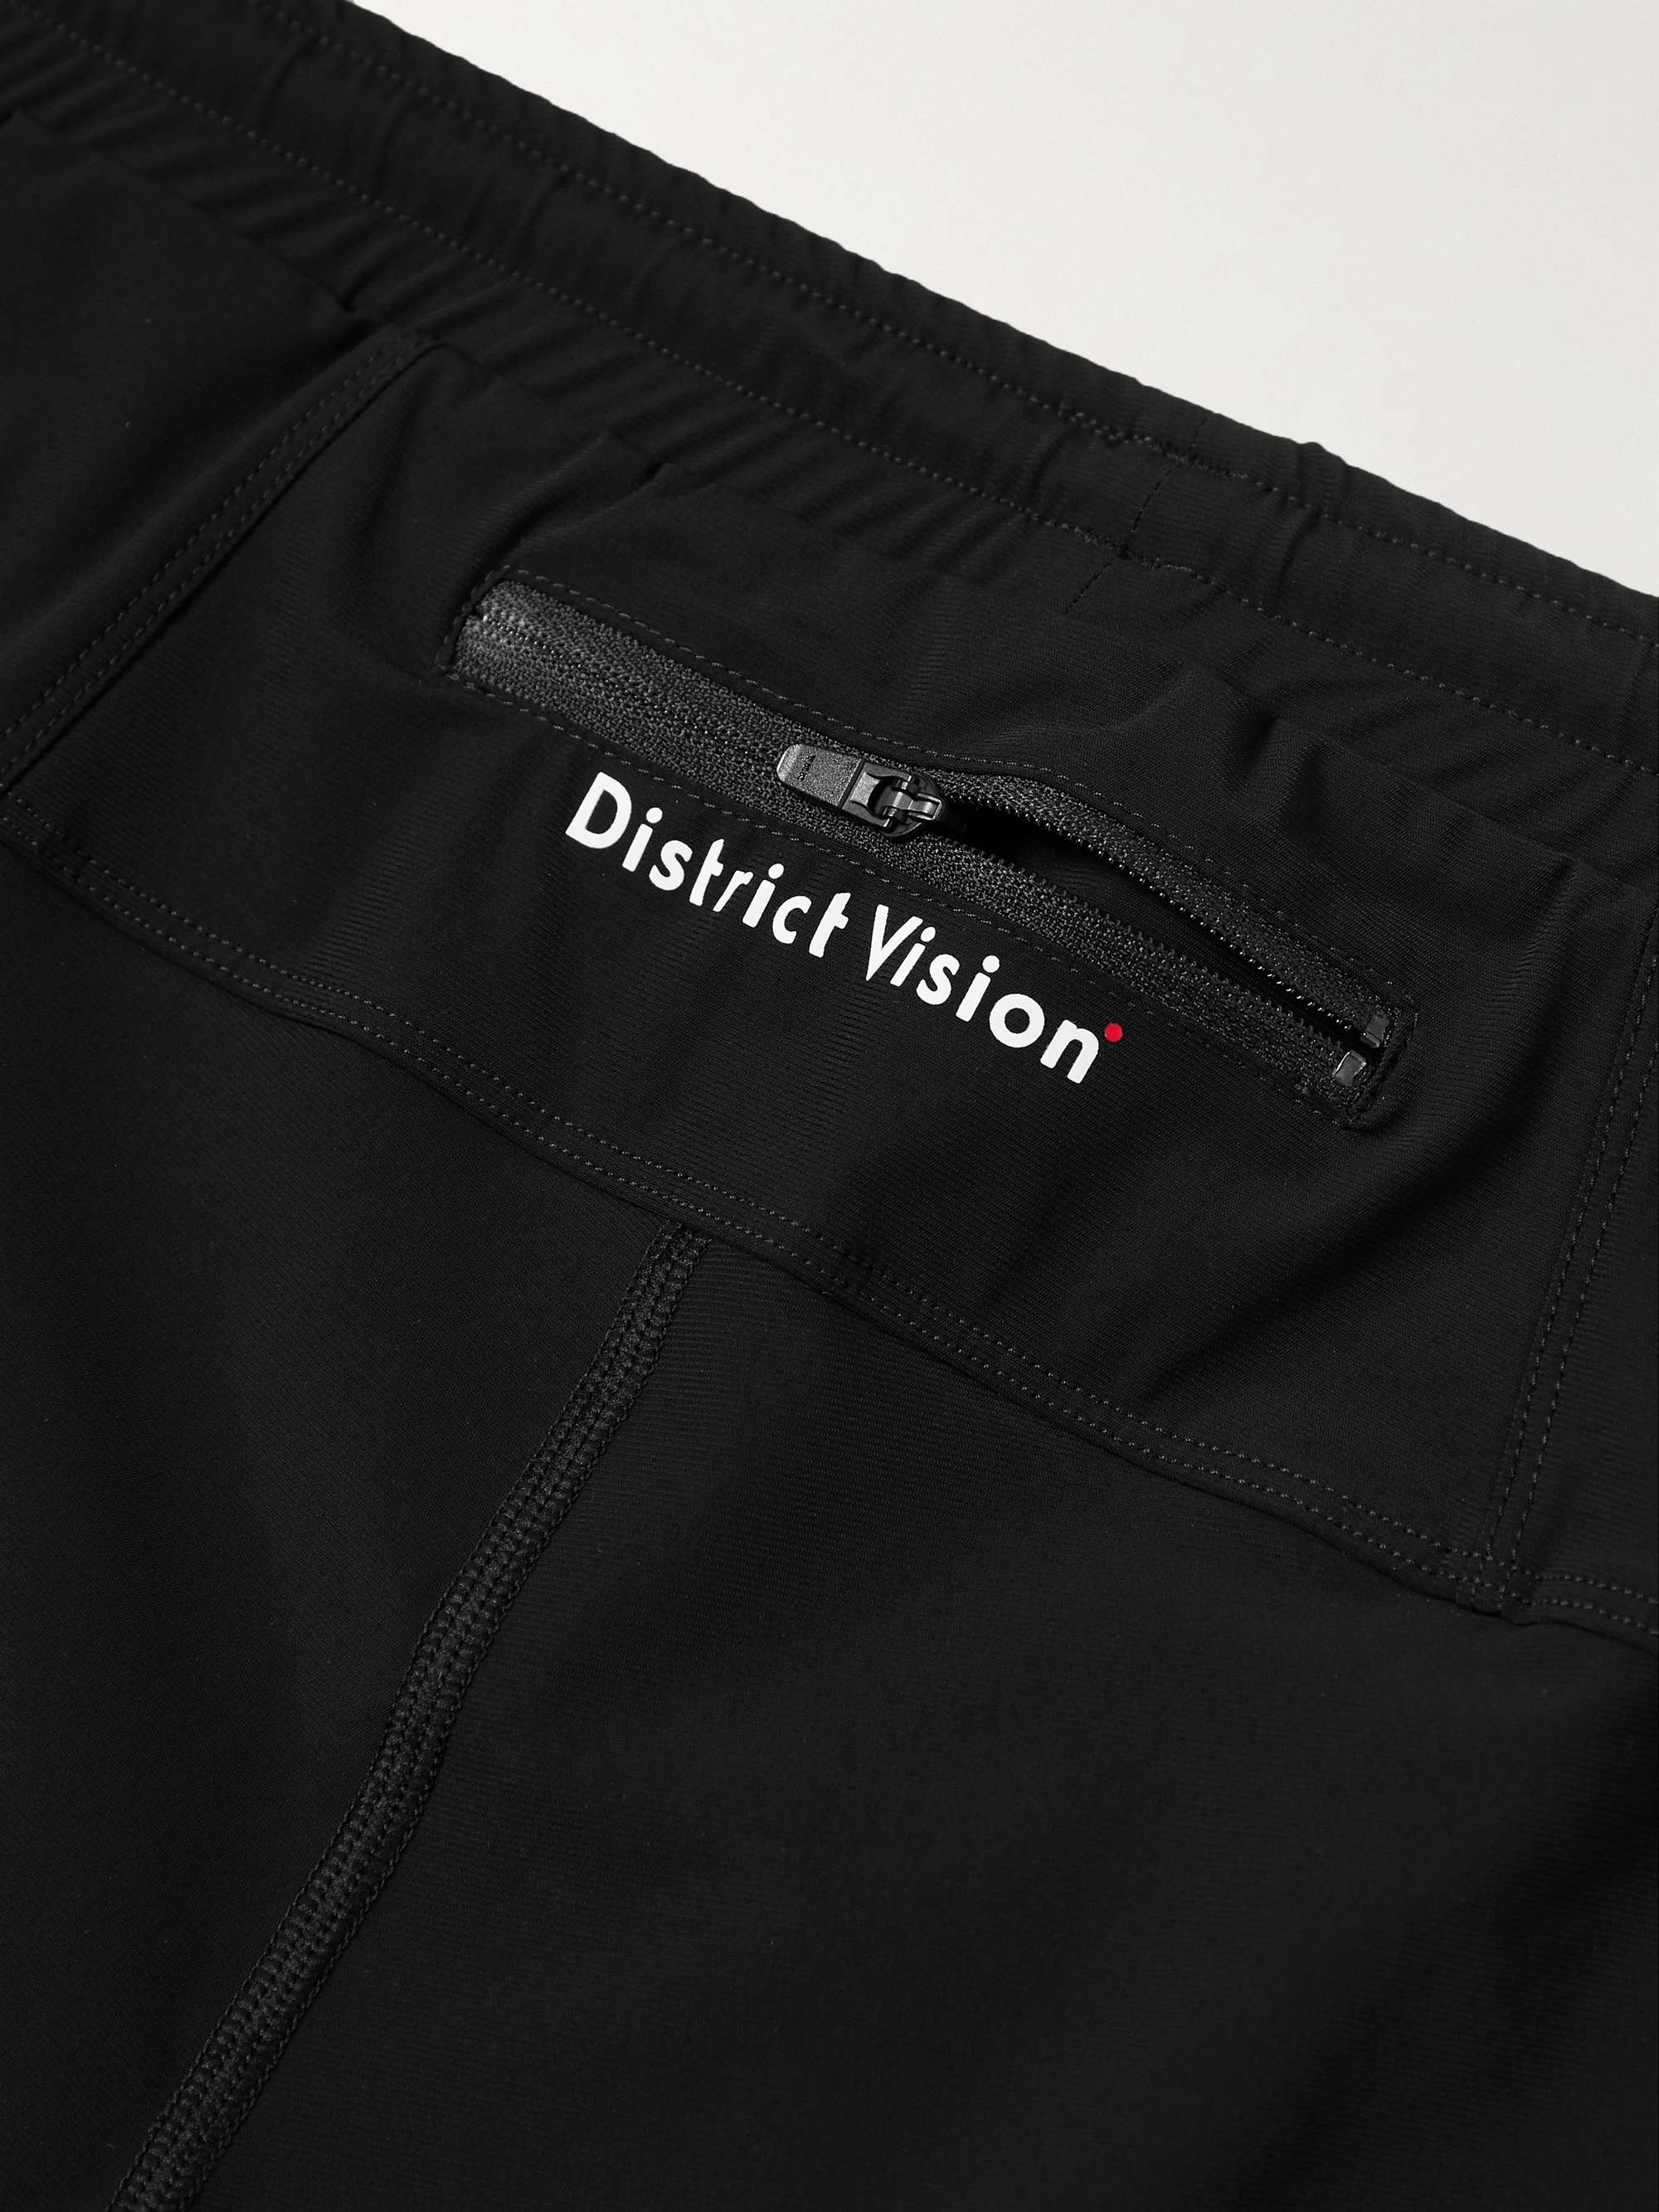 DISTRICT VISION TomTom Speed Tight Stretch Tech-Shell Running Shorts